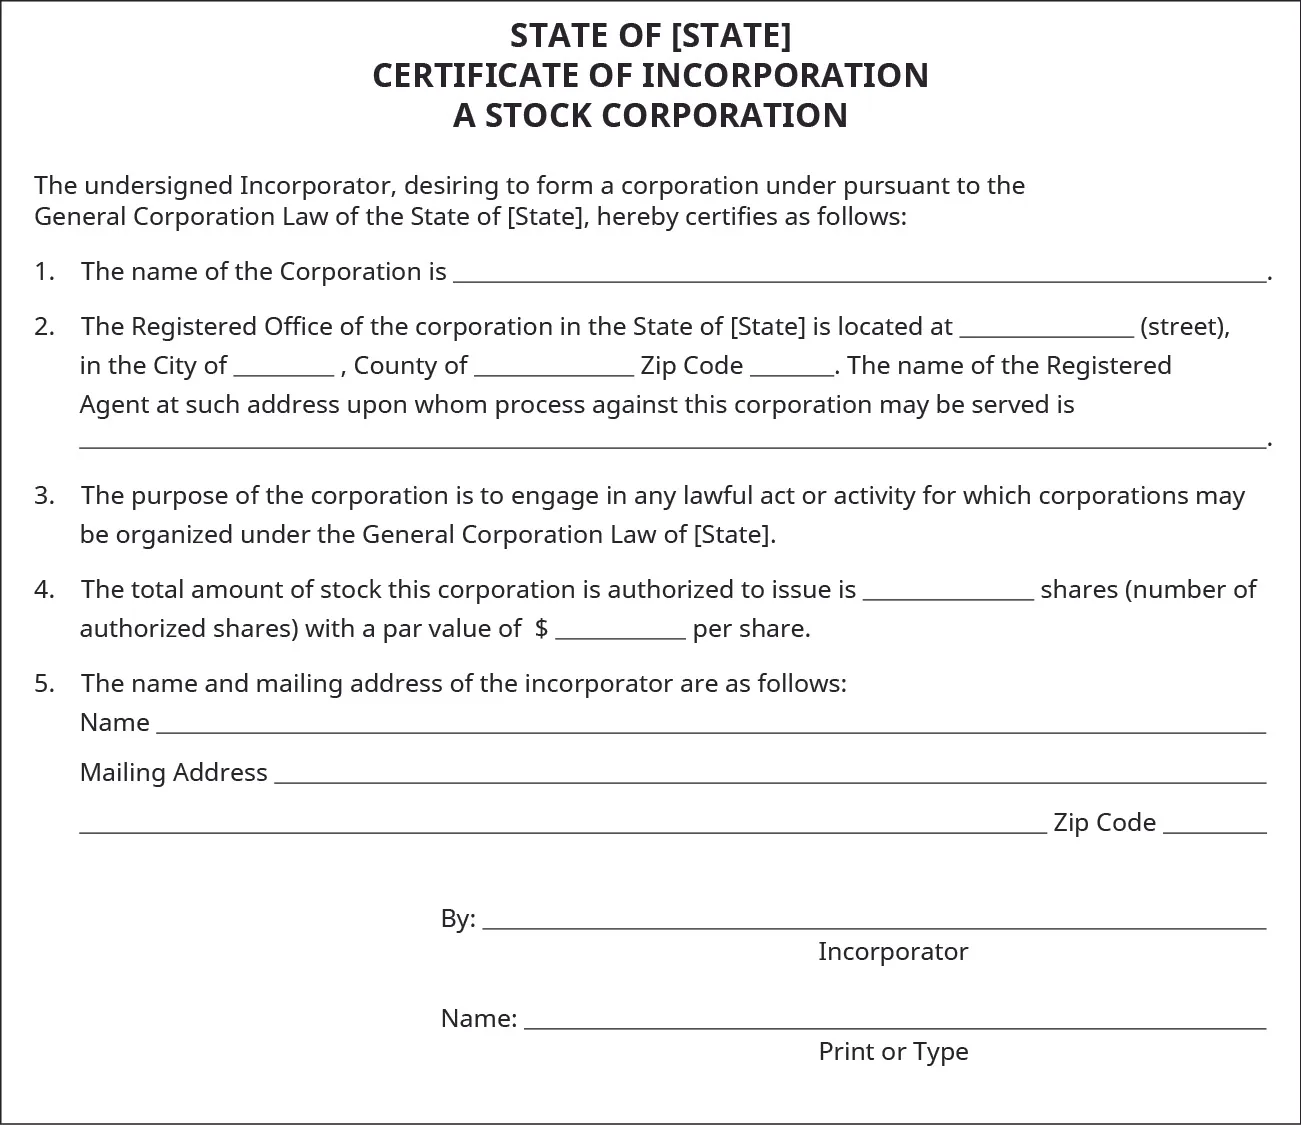 State of Incorporation form that states: “The undersigned Incorporator, desiring to form a corporation under pursuant to the General Corporation Law of the State of [State], hereby certifies as follows:” and leaves space for the incorporator to fill in the name of the corporation, the address (including the county) of the corporation, the name of the registered agent, the total amount of stock the corporation is authorized to issue and the price per share, and the name and mailing address of the incorporator. The form also states: “The purpose of the corporation is to engage in any lawful act or activity for which corporations may be organized under the General Corporation Law of [State].” The incorporator must also sign the form.